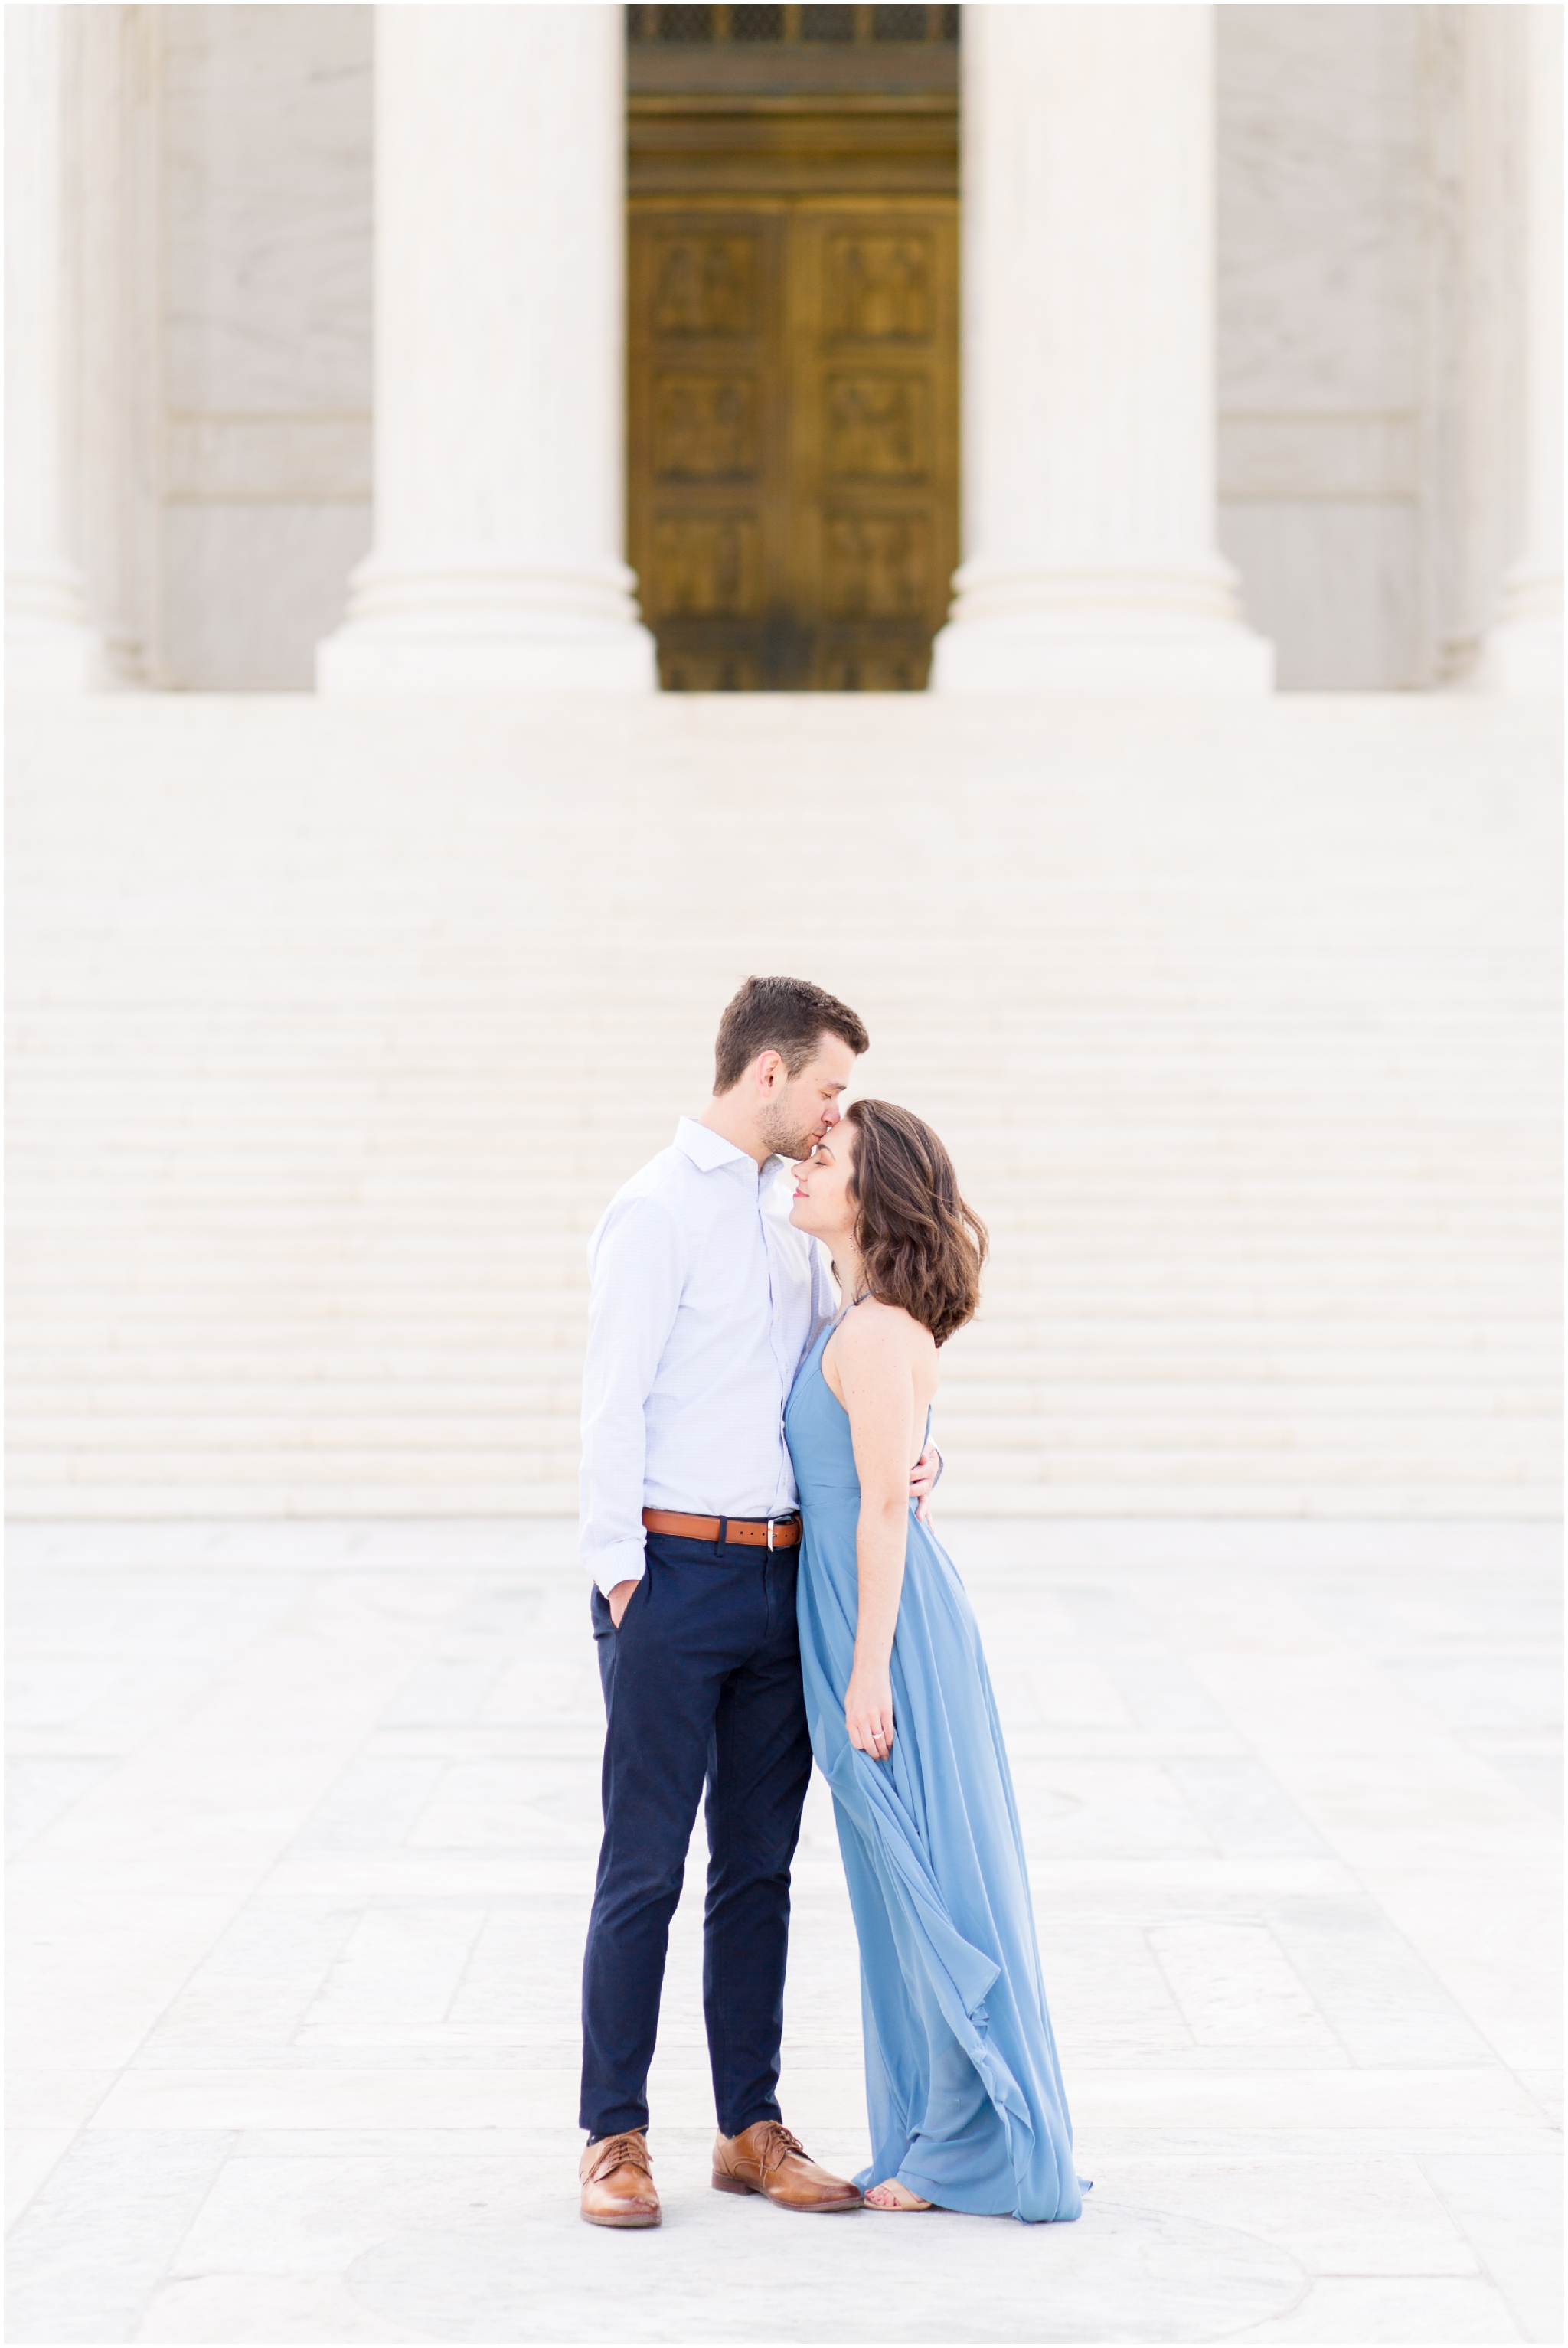 DC engagement photographer captured us capitol building engagement session in Washington D.C., and went to the Supreme Court Building, as well as the Library of Congress steps. Deanna wore a slate blue Lulu’s Mythical Kind of Love Dress.